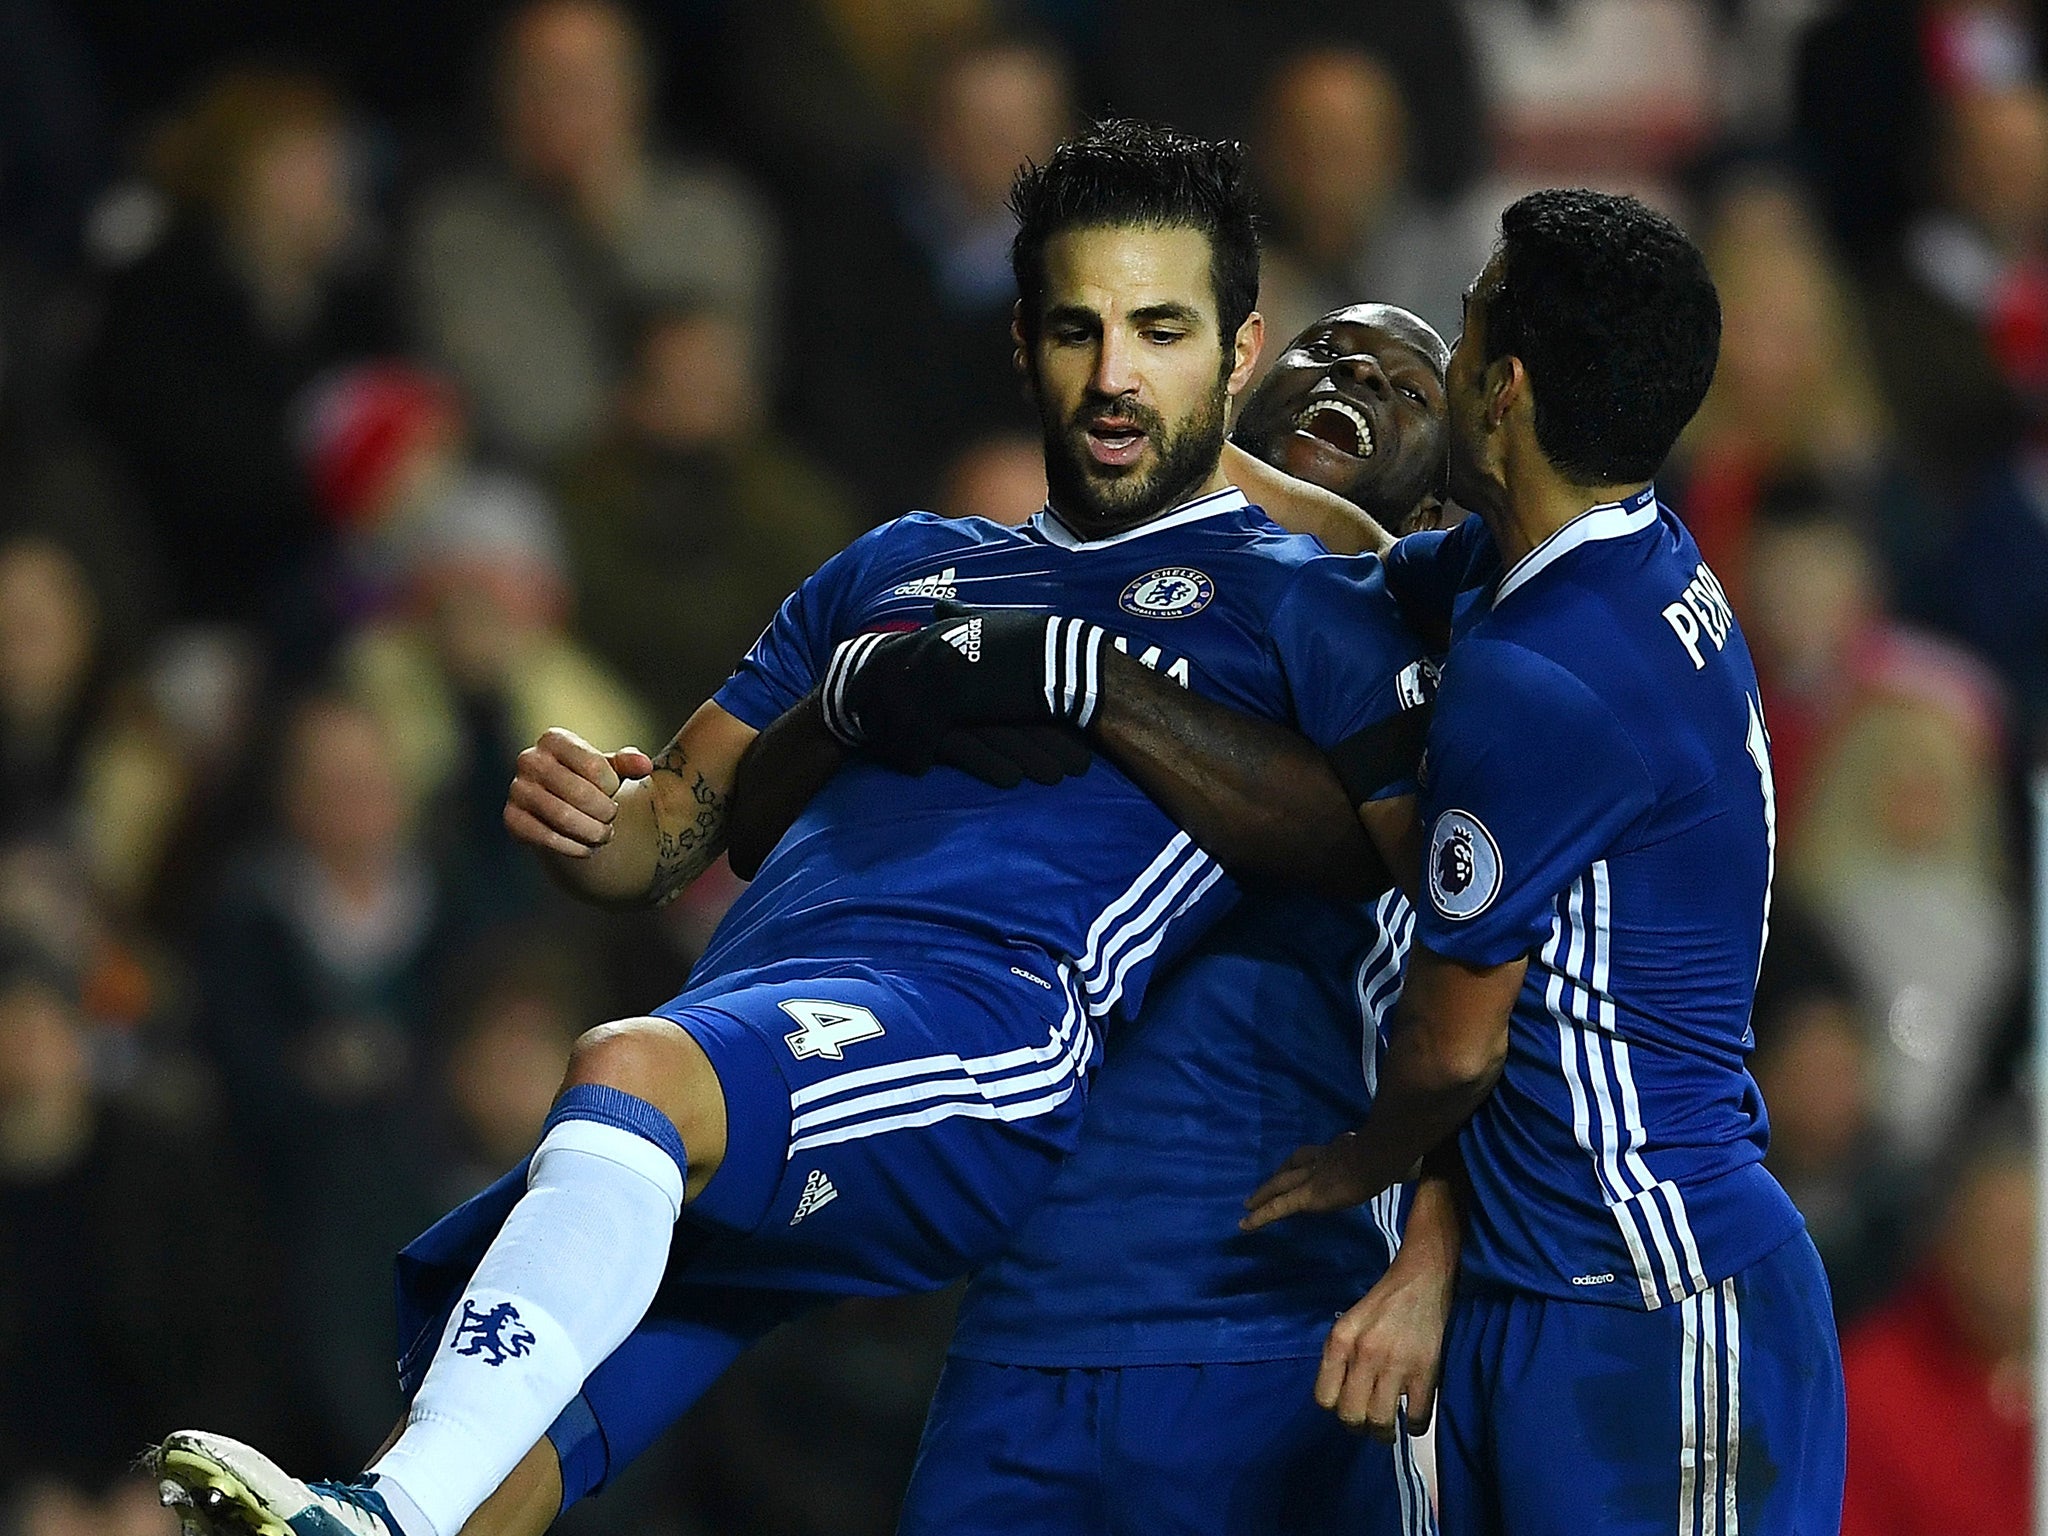 Fabregas opened the scoring after a one-two with Willian